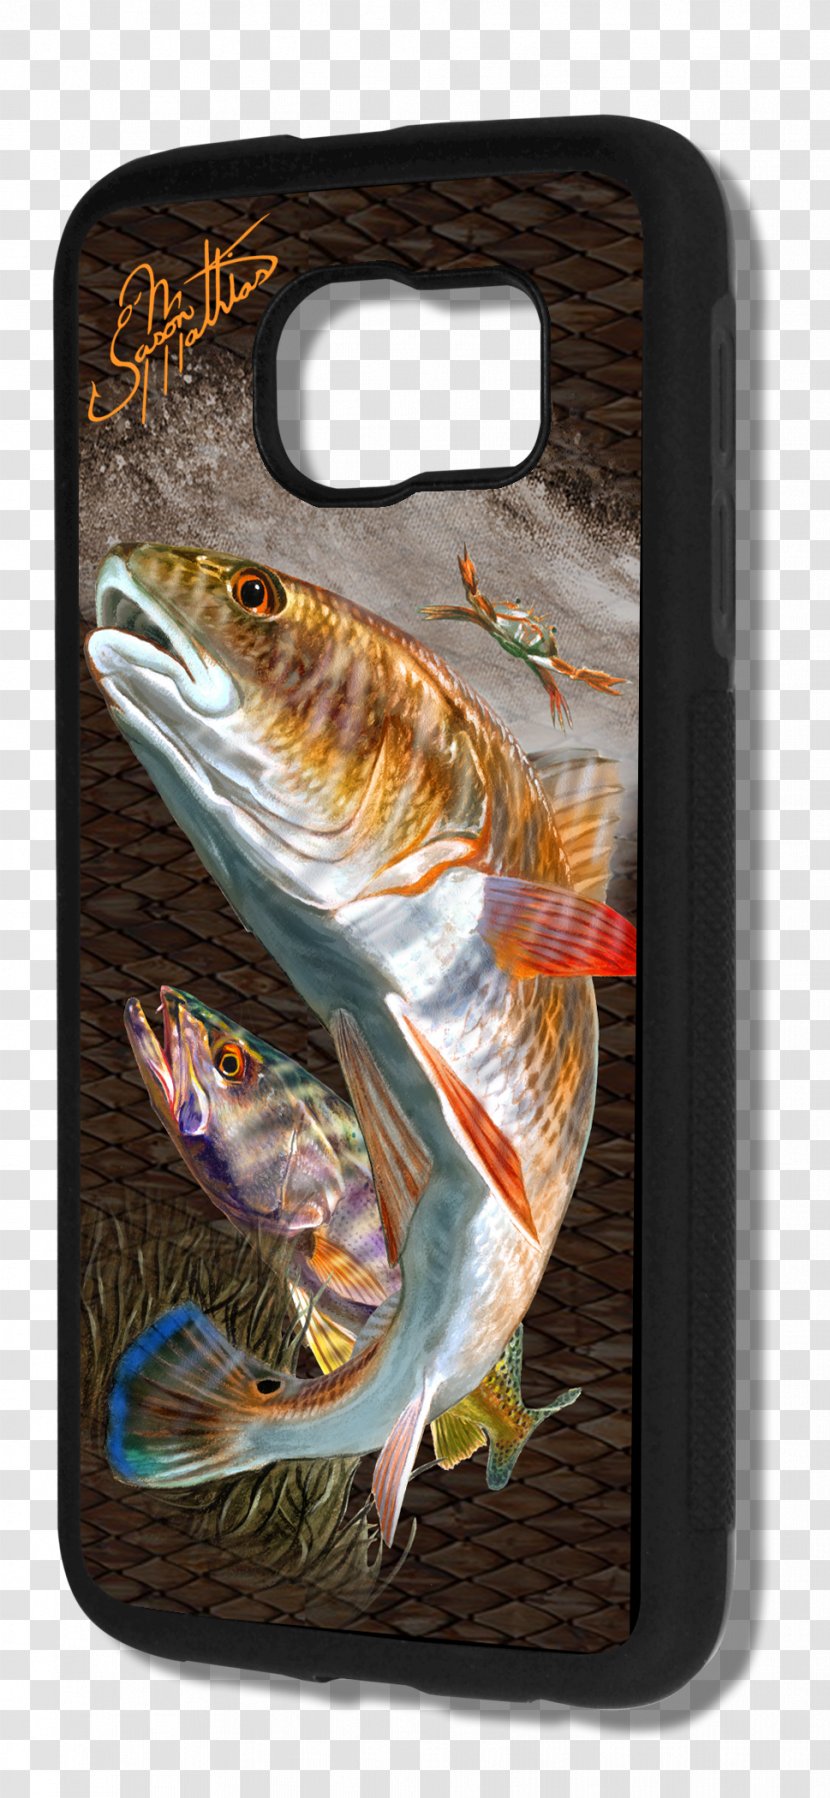 Apple IPhone 7 Plus 6S Mobile Phone Accessories Art - Iphone - Spotted Seatrout Transparent PNG